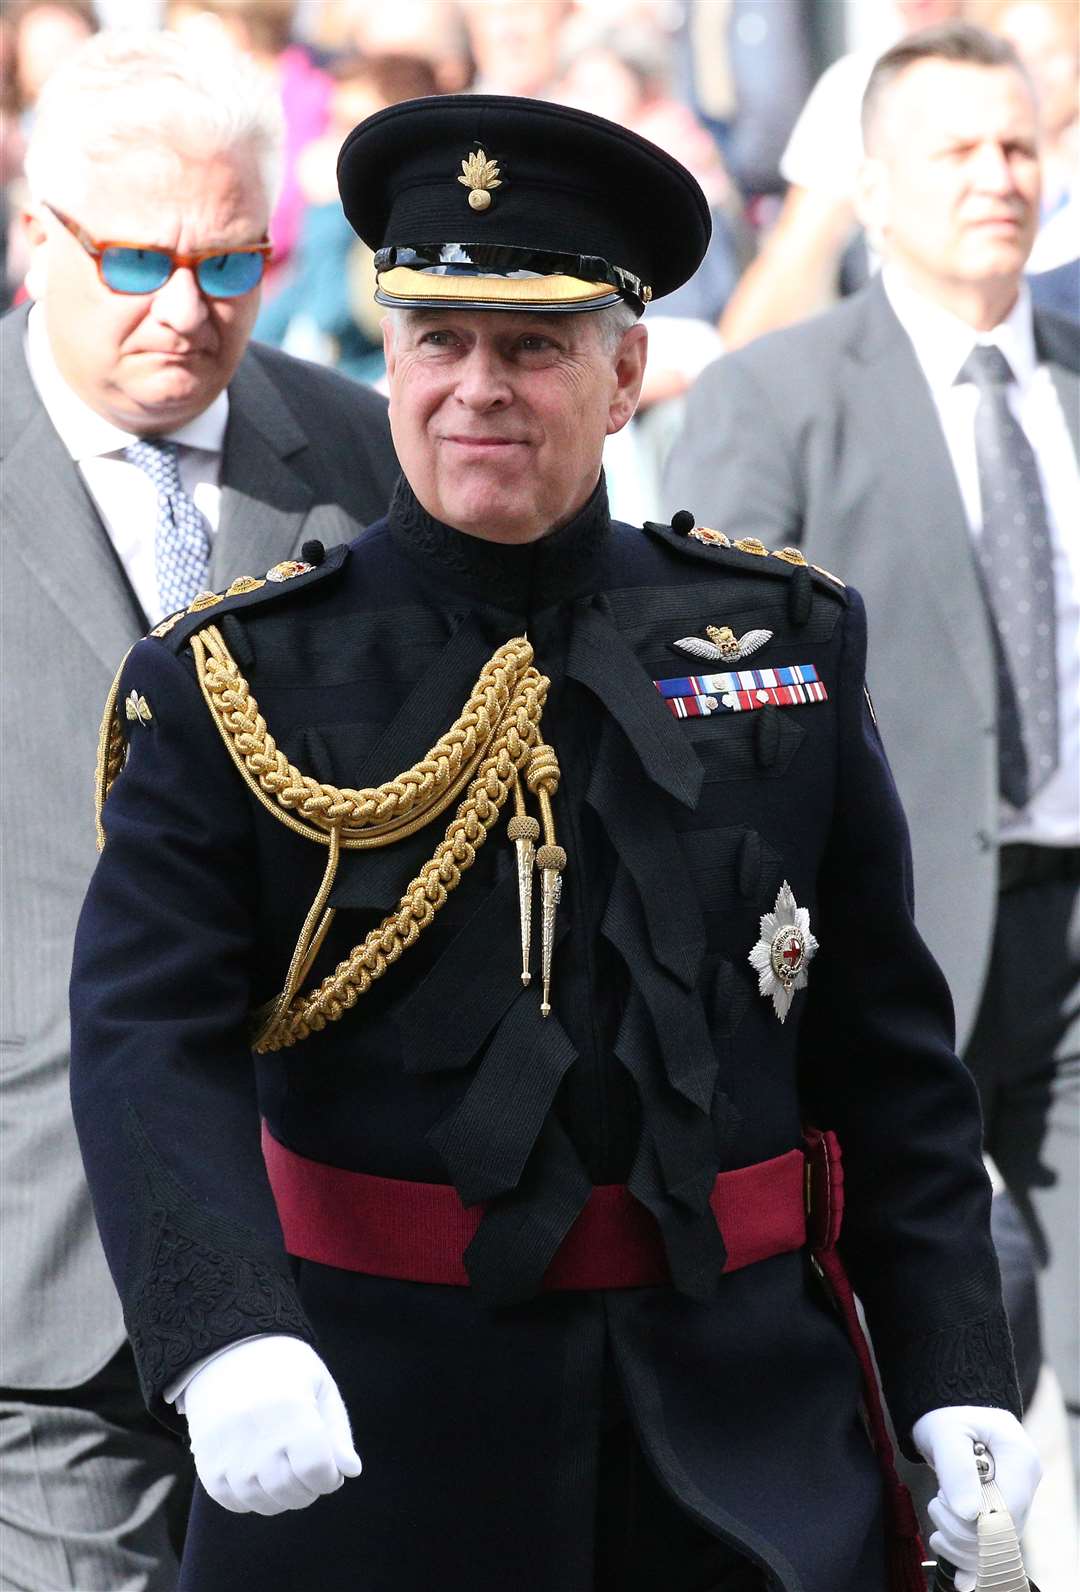 The Duke of York, in his role as colonel of the Grenadier Guards, at a memorial in Bruges in 2019 (Jonathan Brady/PA)